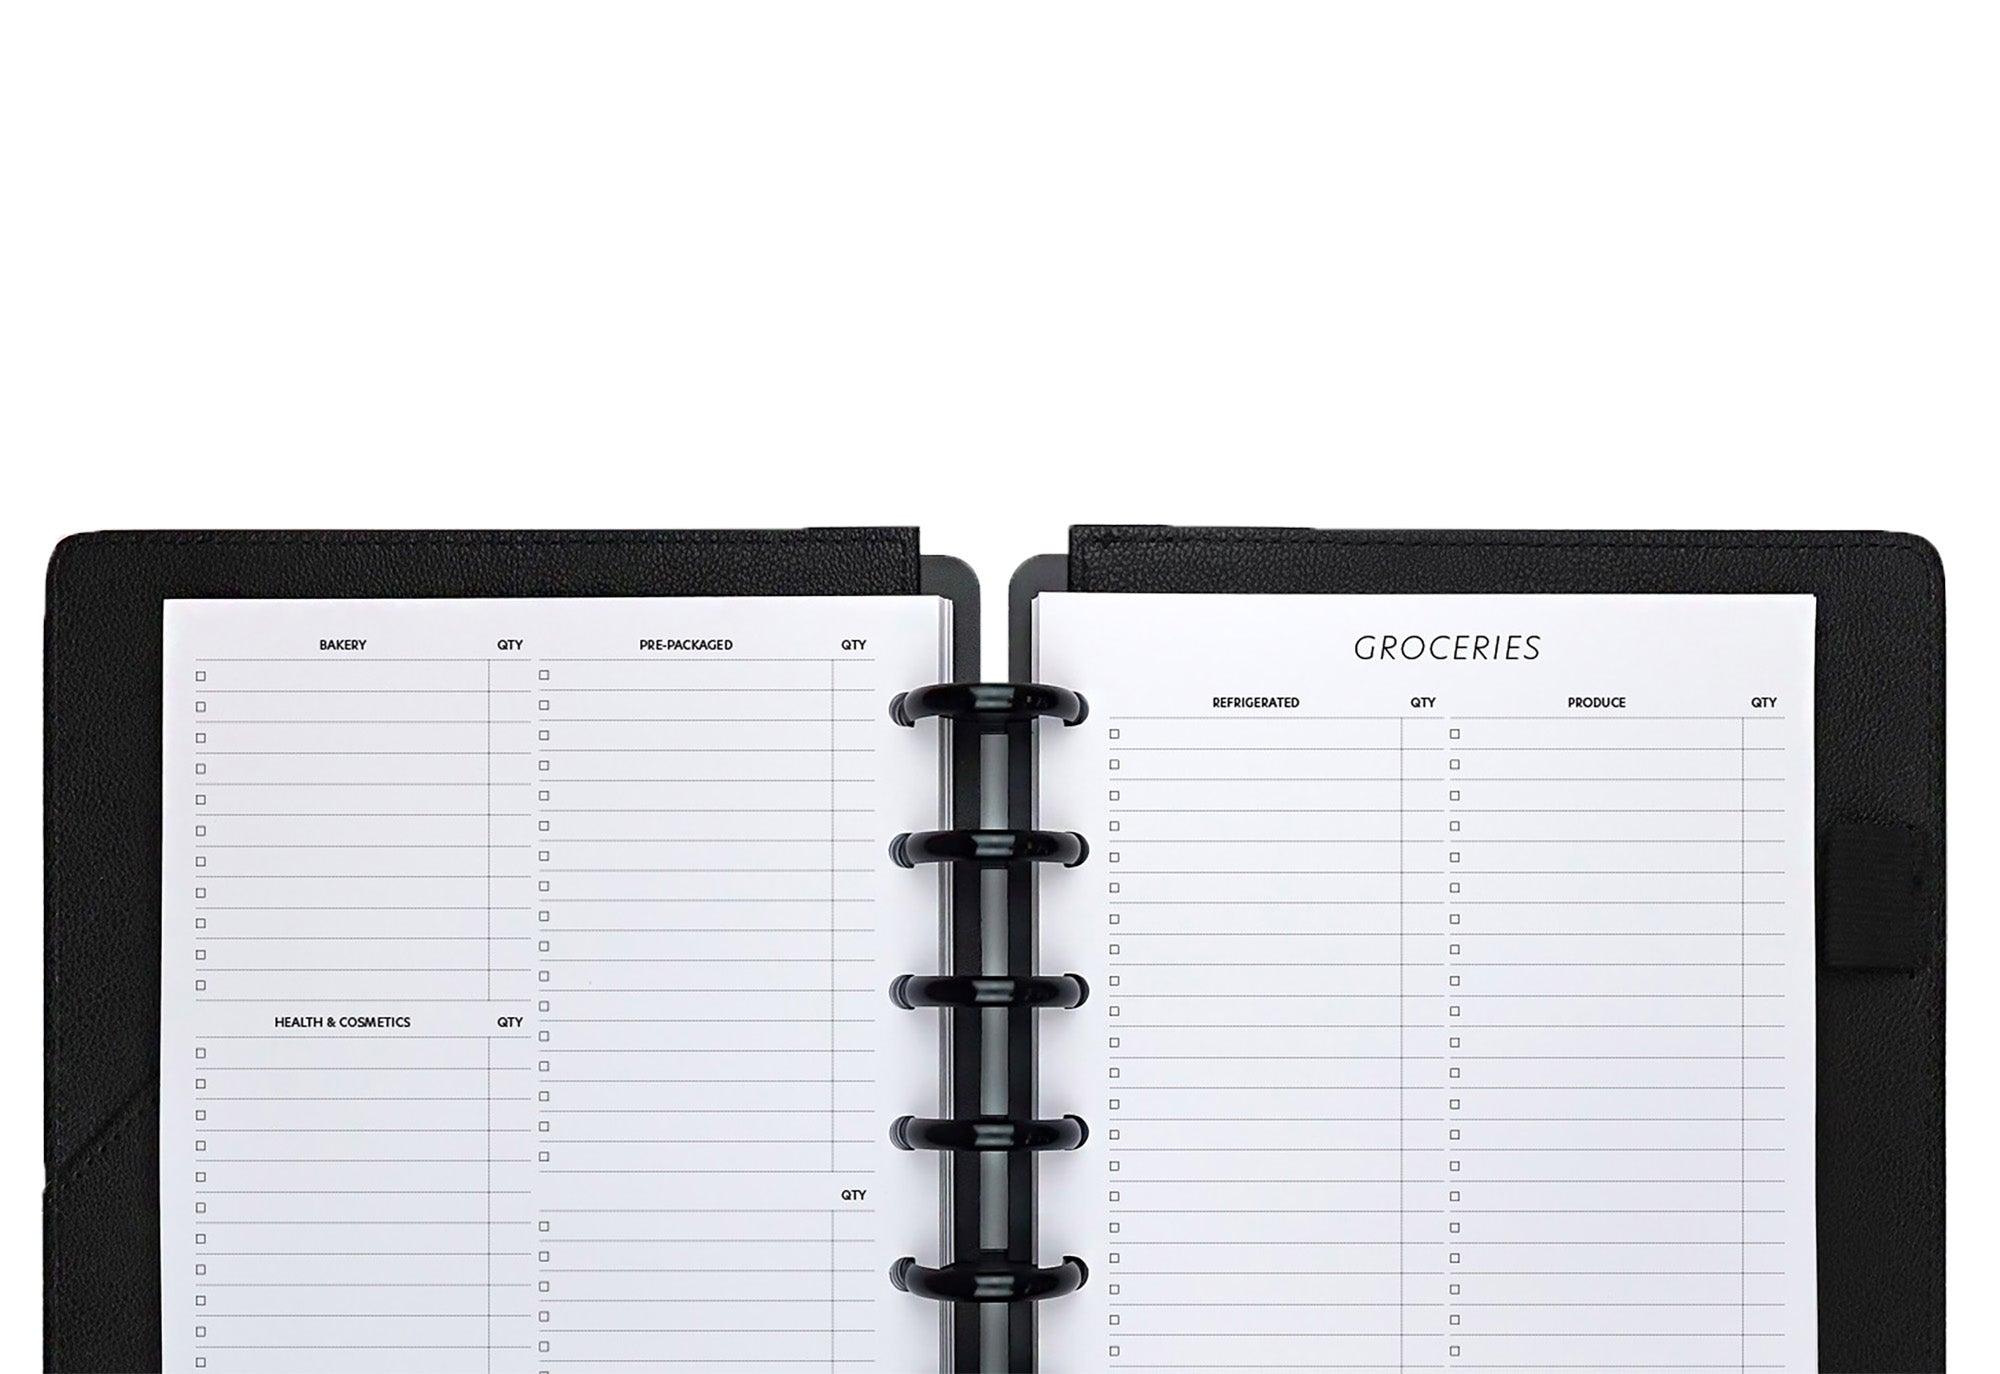 Grocerylist lifestyle planner inserts for every day planning with your discbound and six ring planner system by Janes agenda.